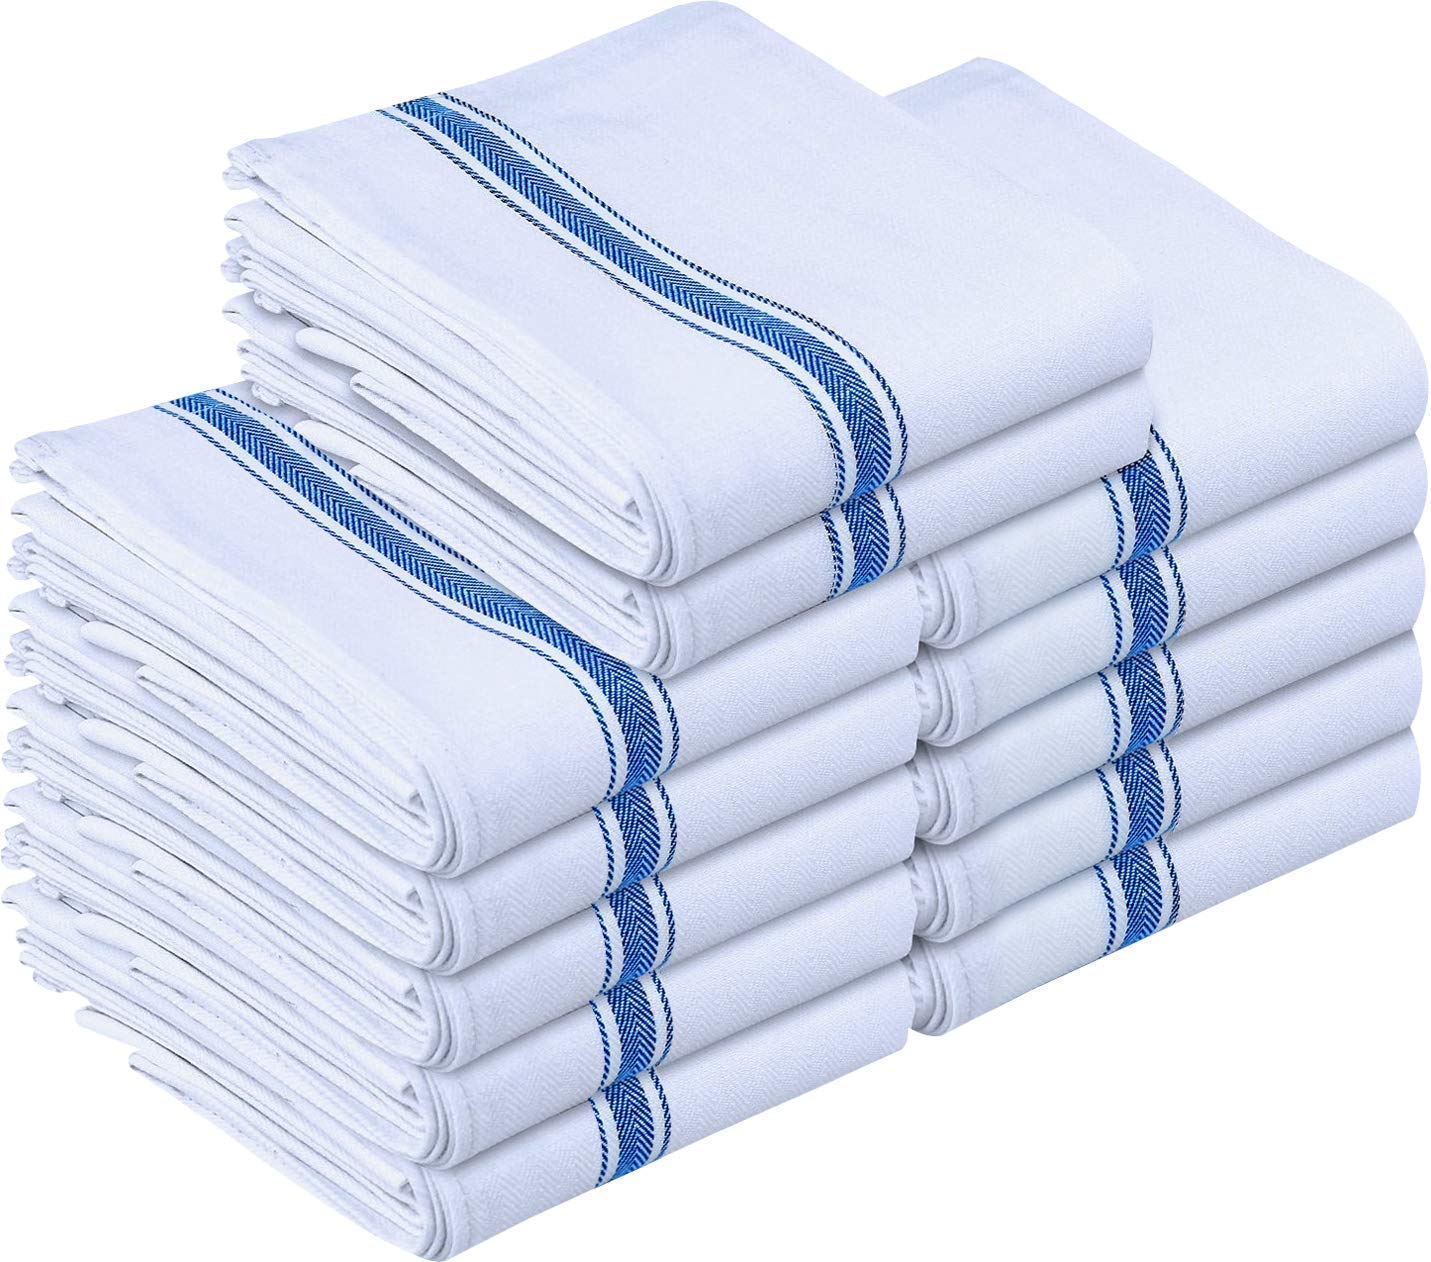 Utopia Commercial Lightweight Dish Towels, 12-Pack